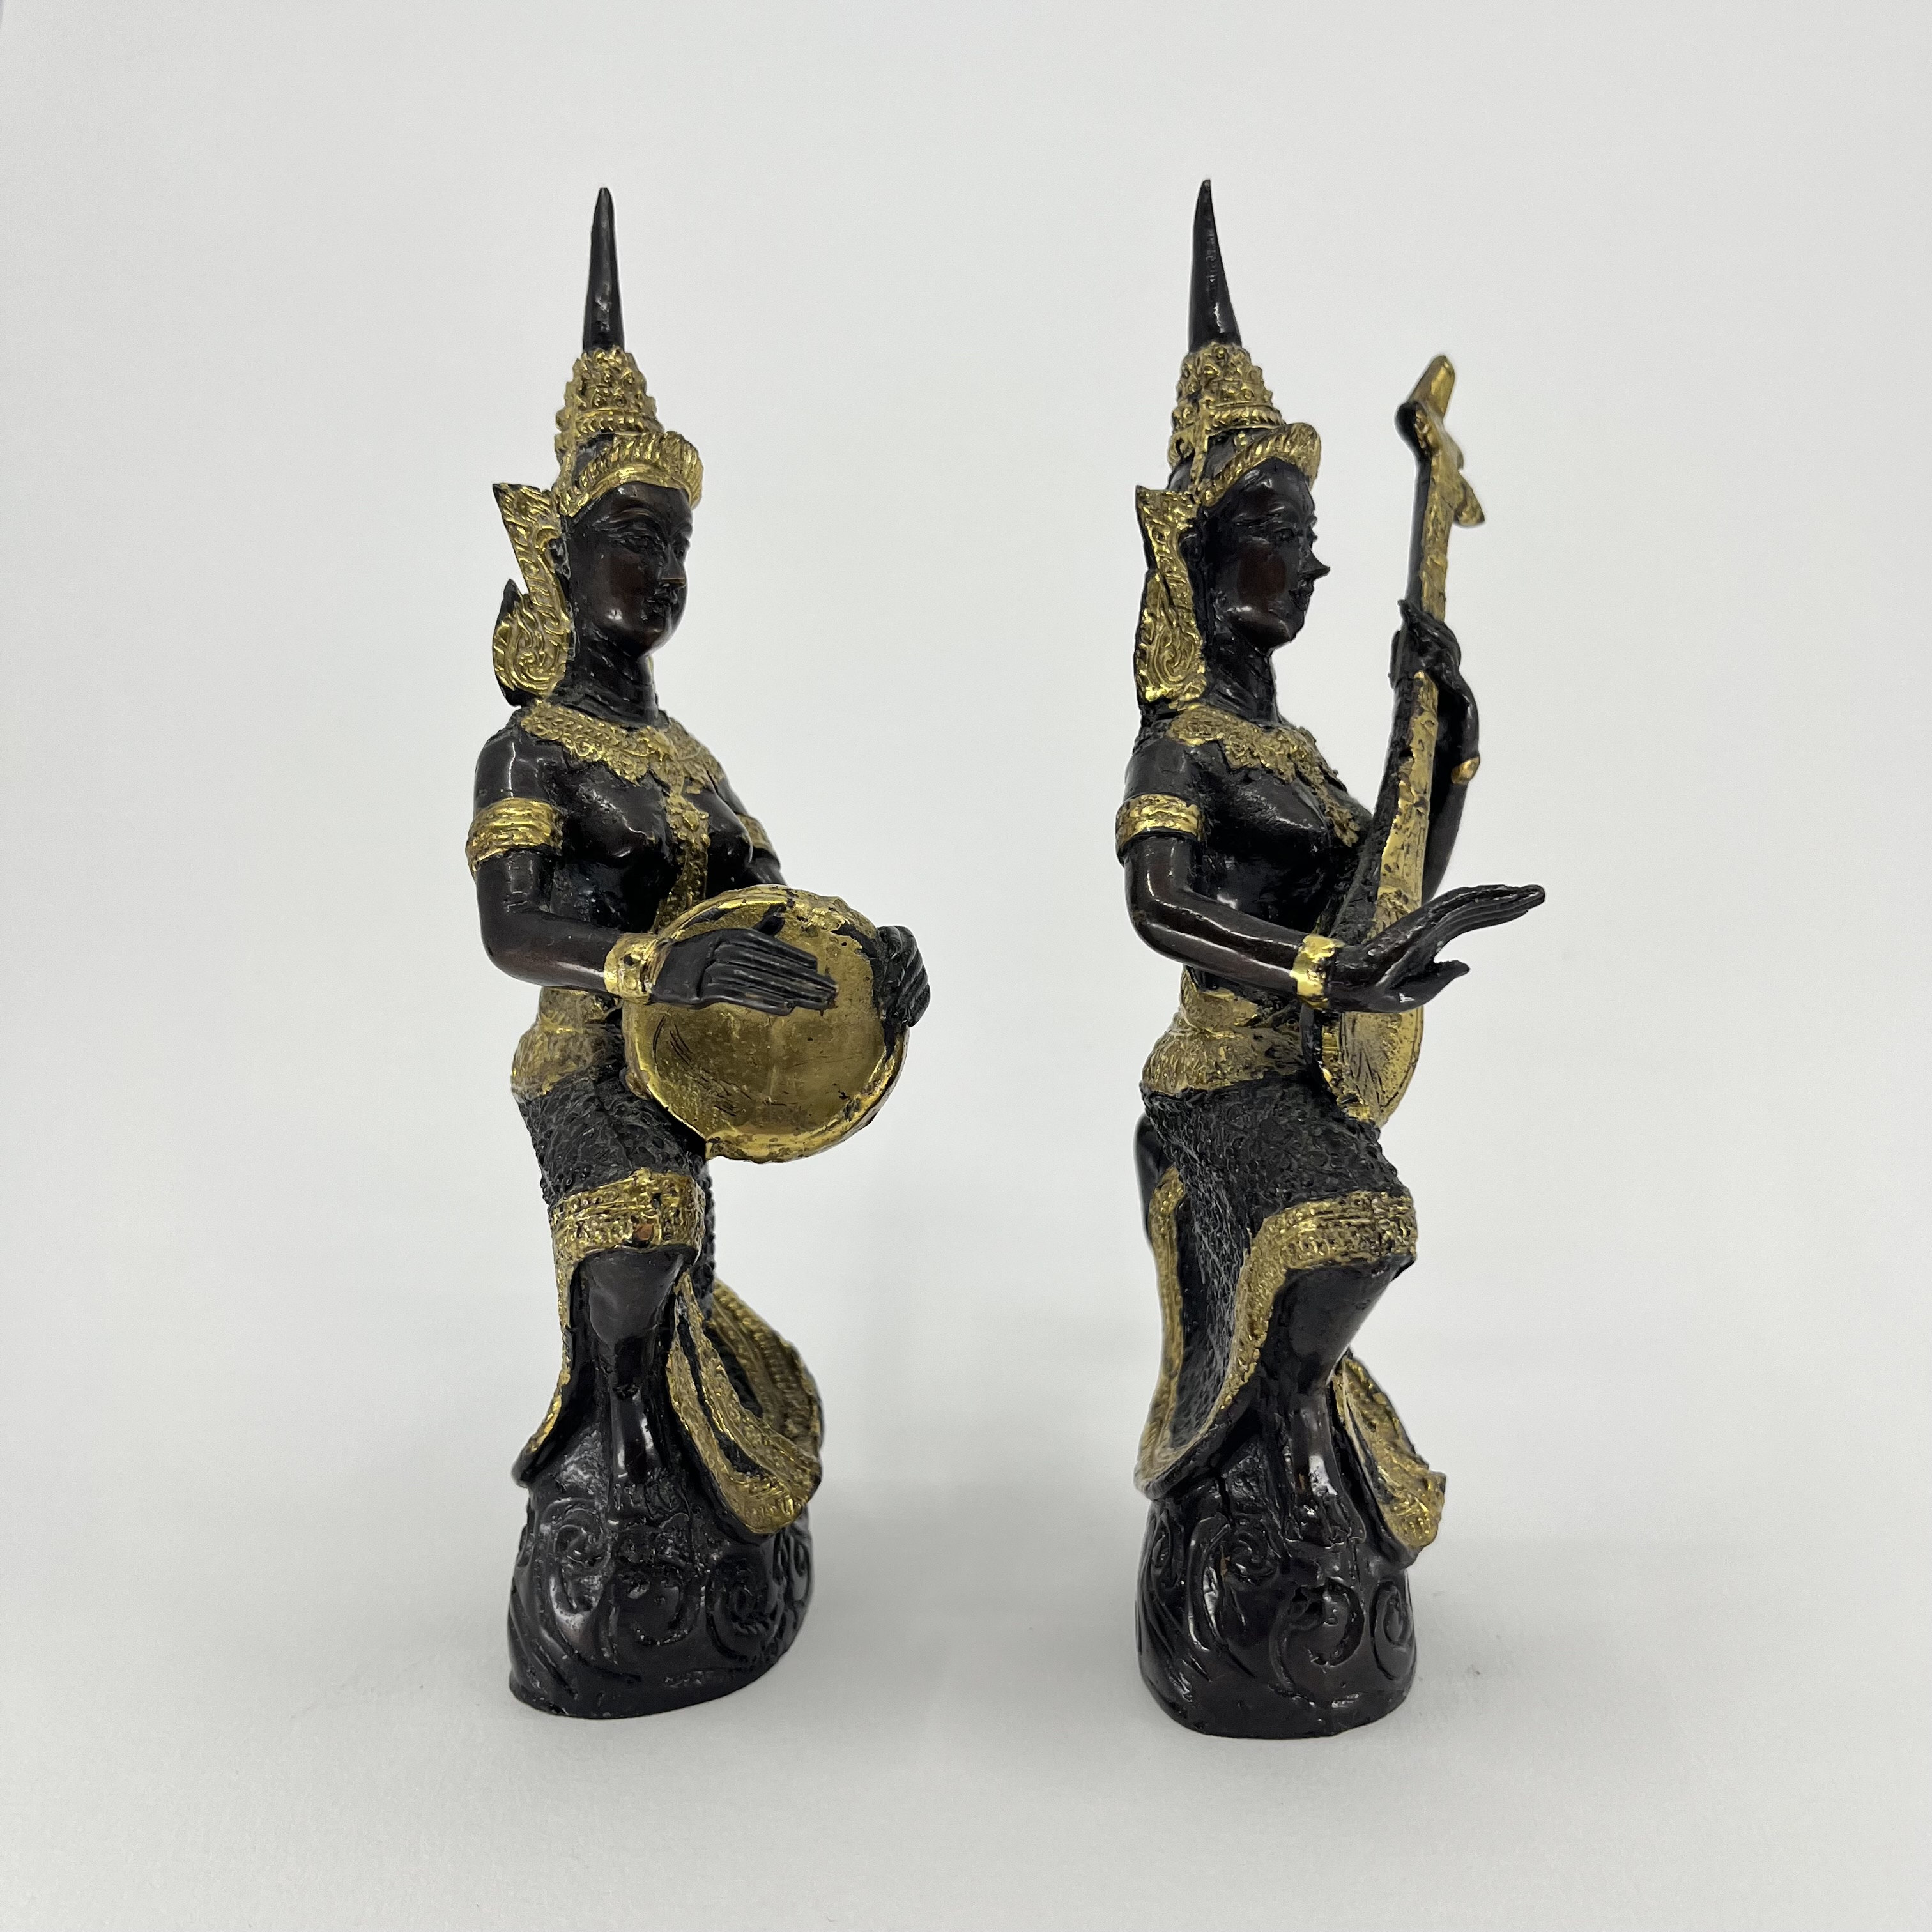 A Pair of Gilded Bronze Thai Theppanom Angel Temple Musician Figurines - Image 2 of 7